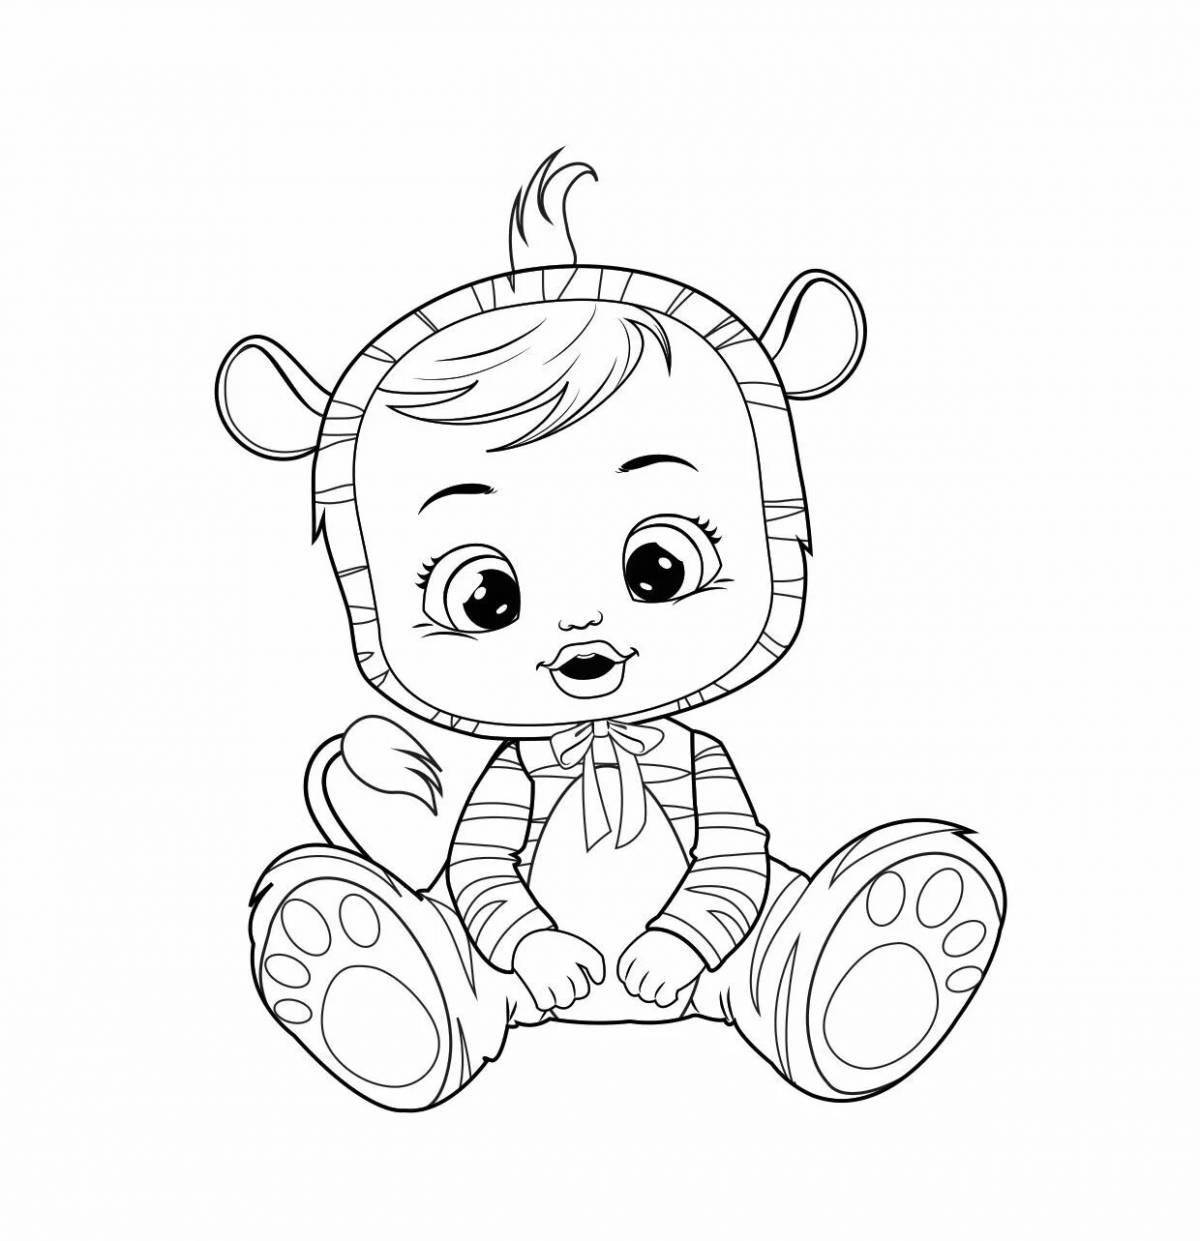 Crying children coloring page